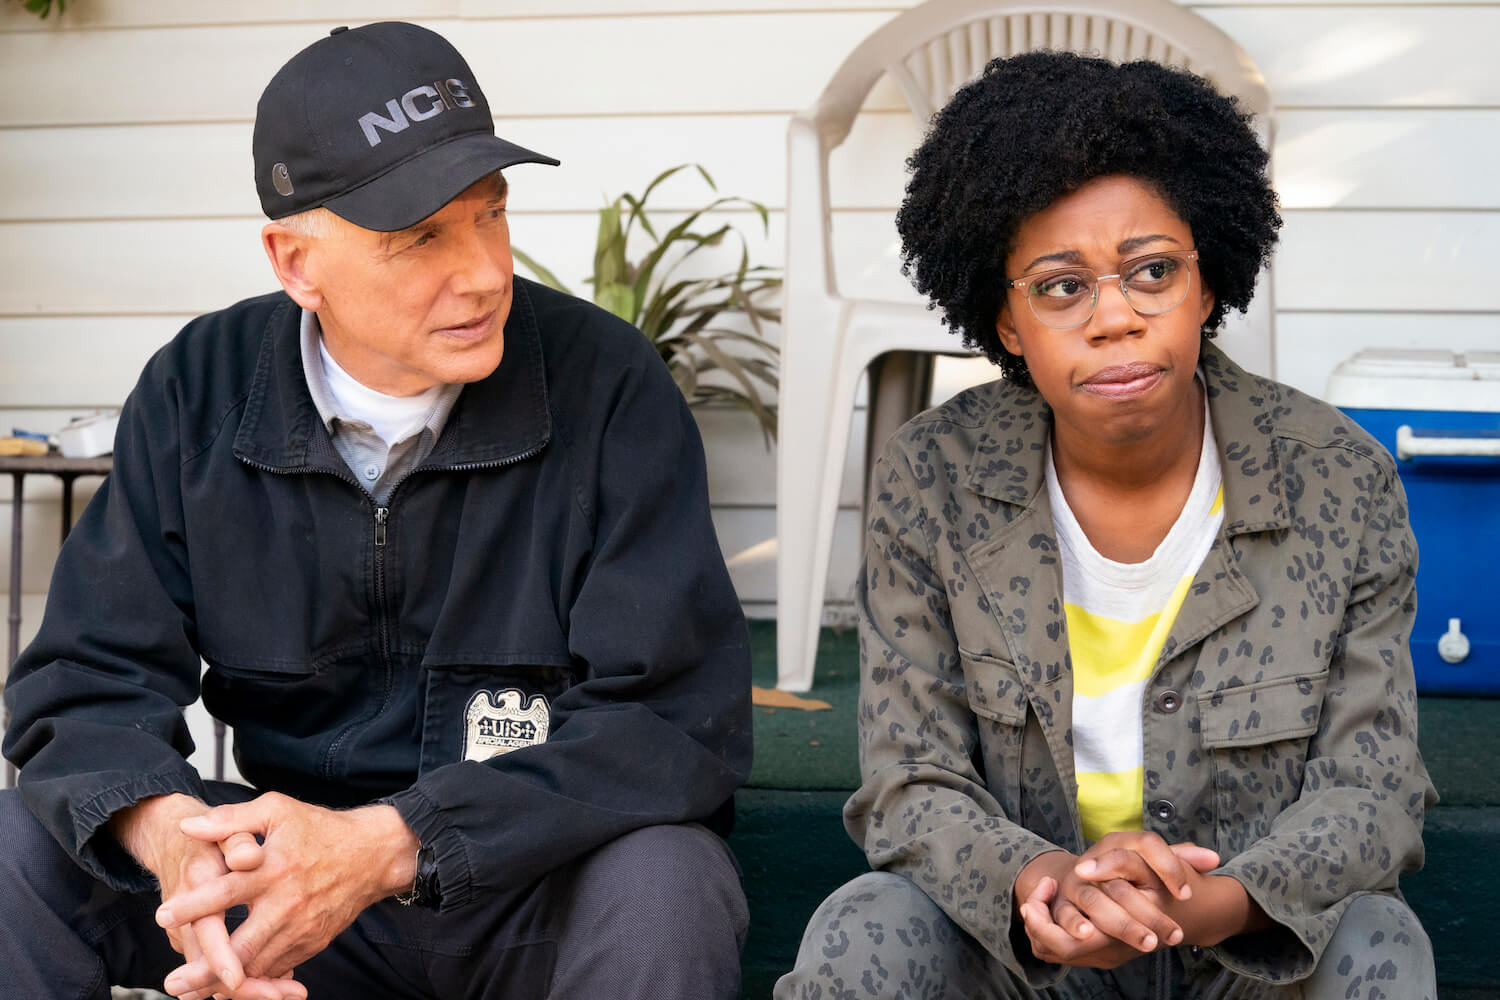 'NCIS' star Mark Harmon in uniform sitting next to Diona Reasonover in a scene in the show